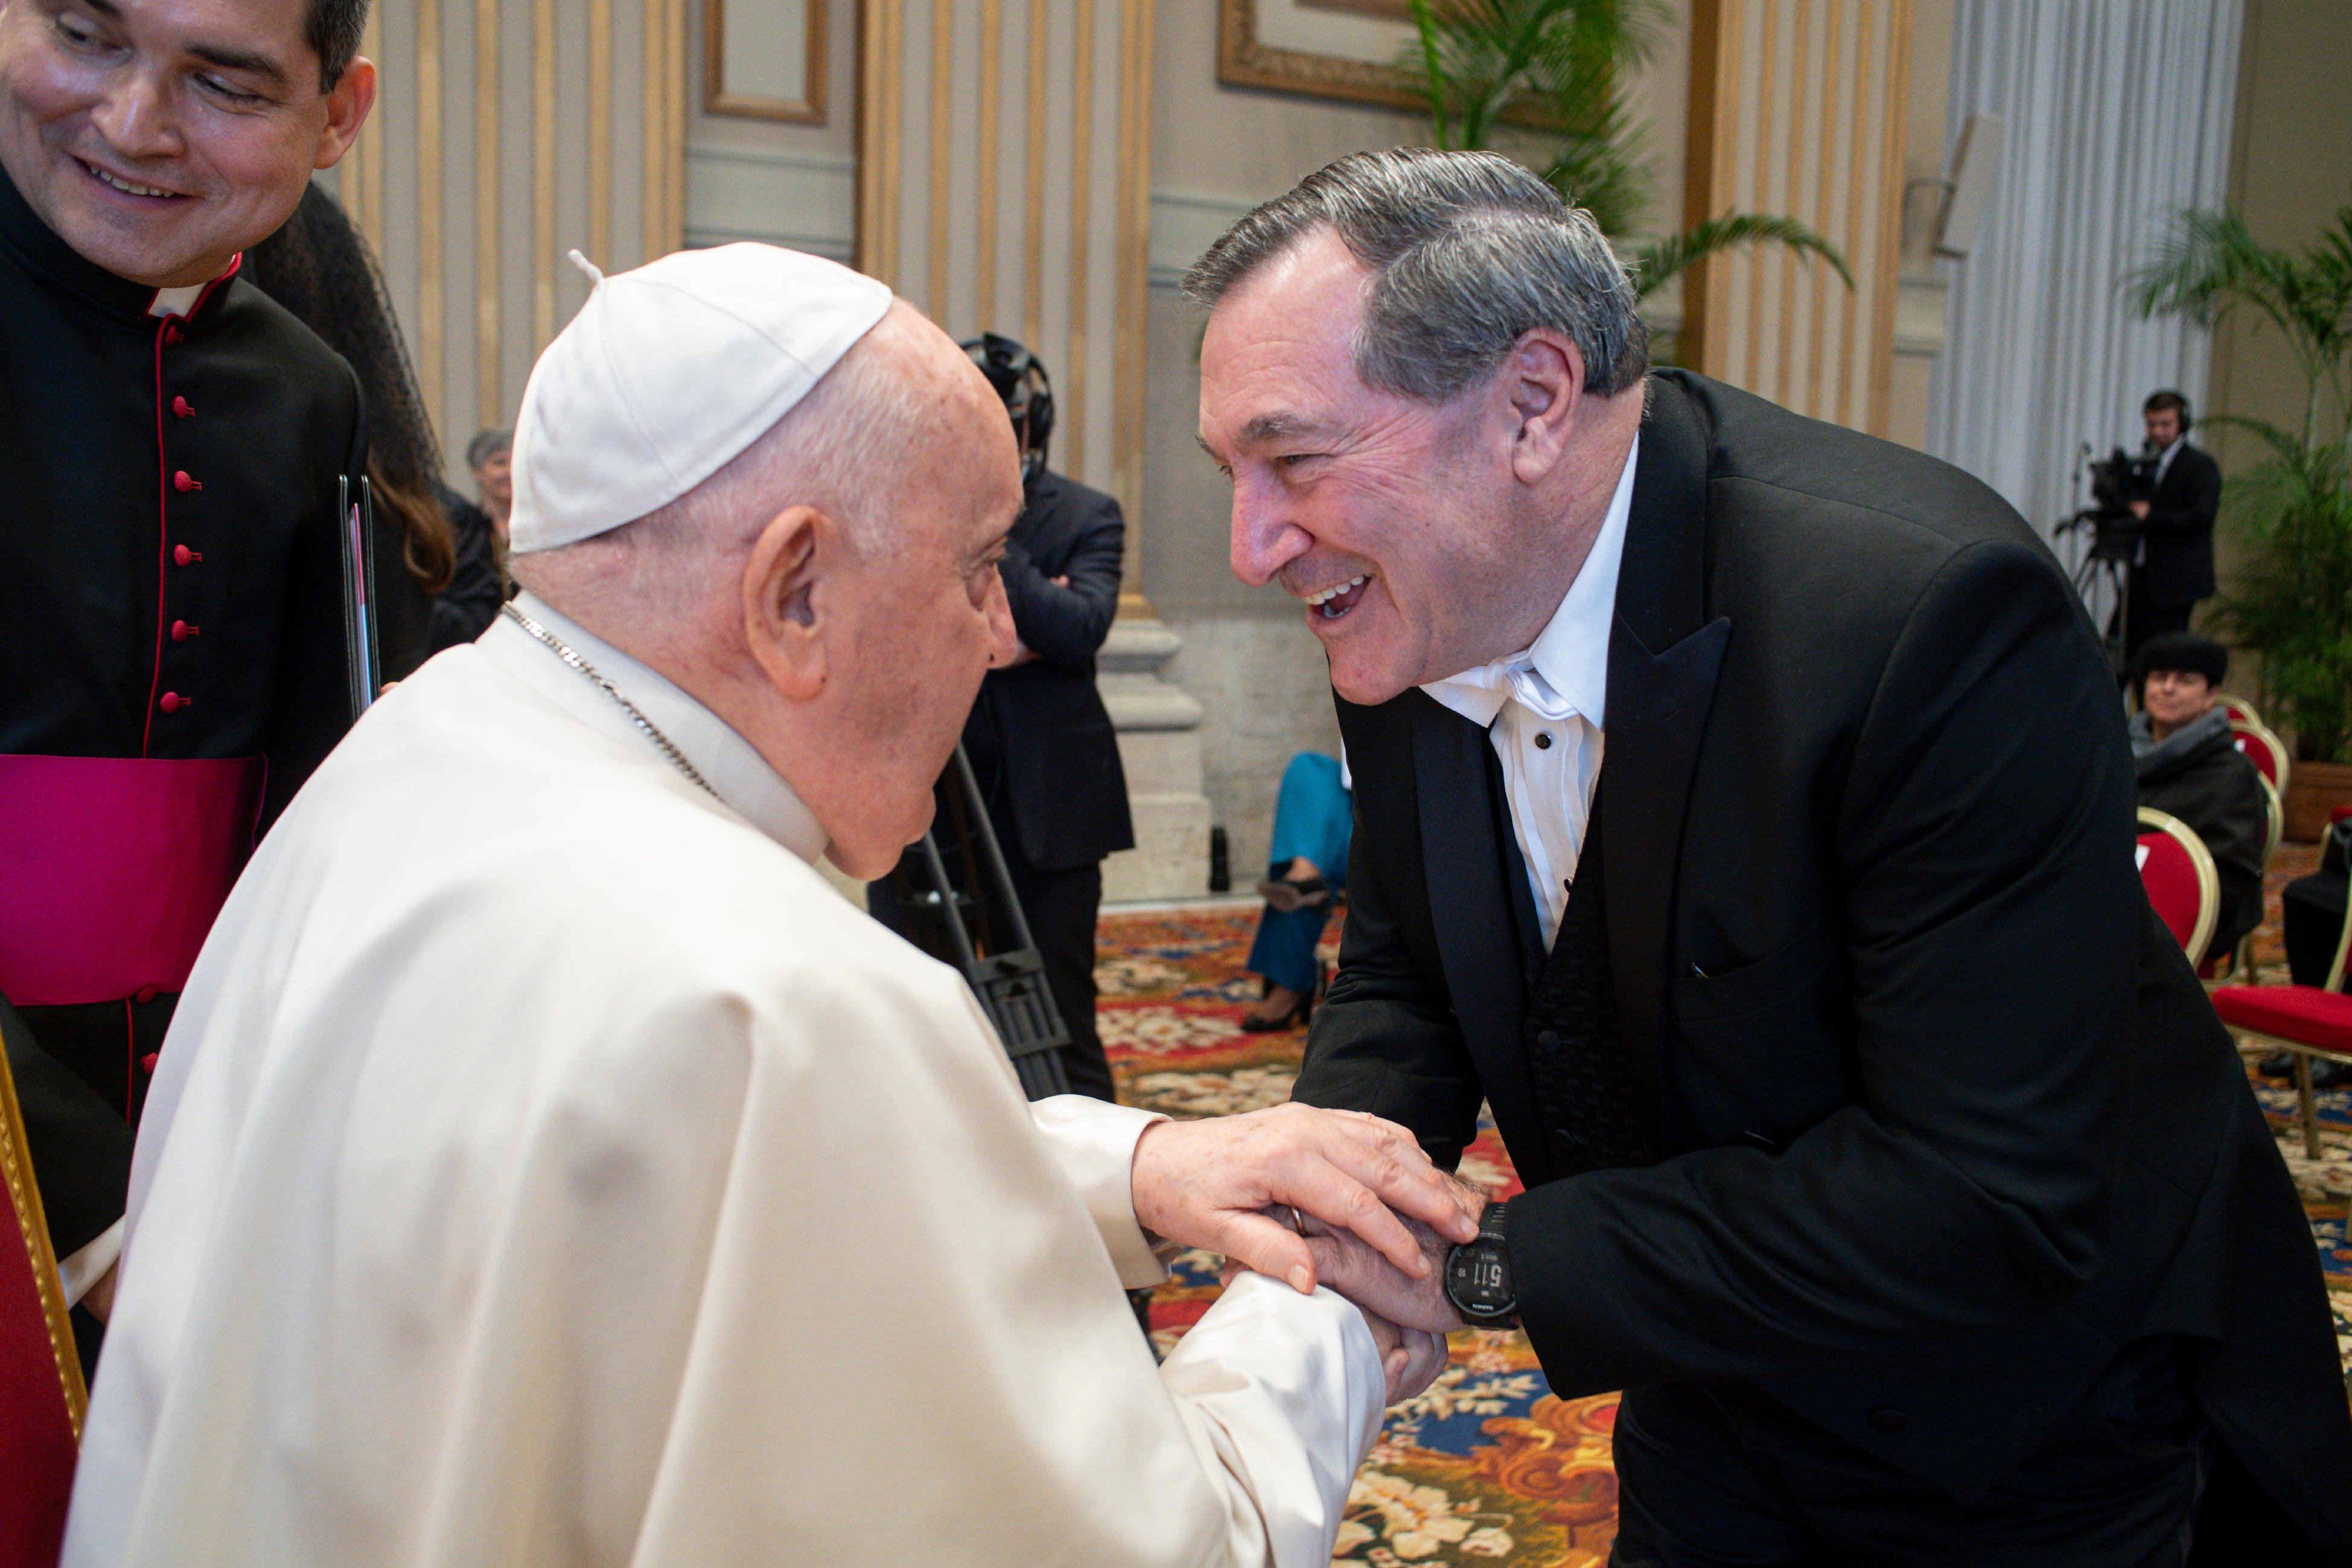 Pope Francis greets Joe Donnelly, U.S. ambassador to the Holy See.